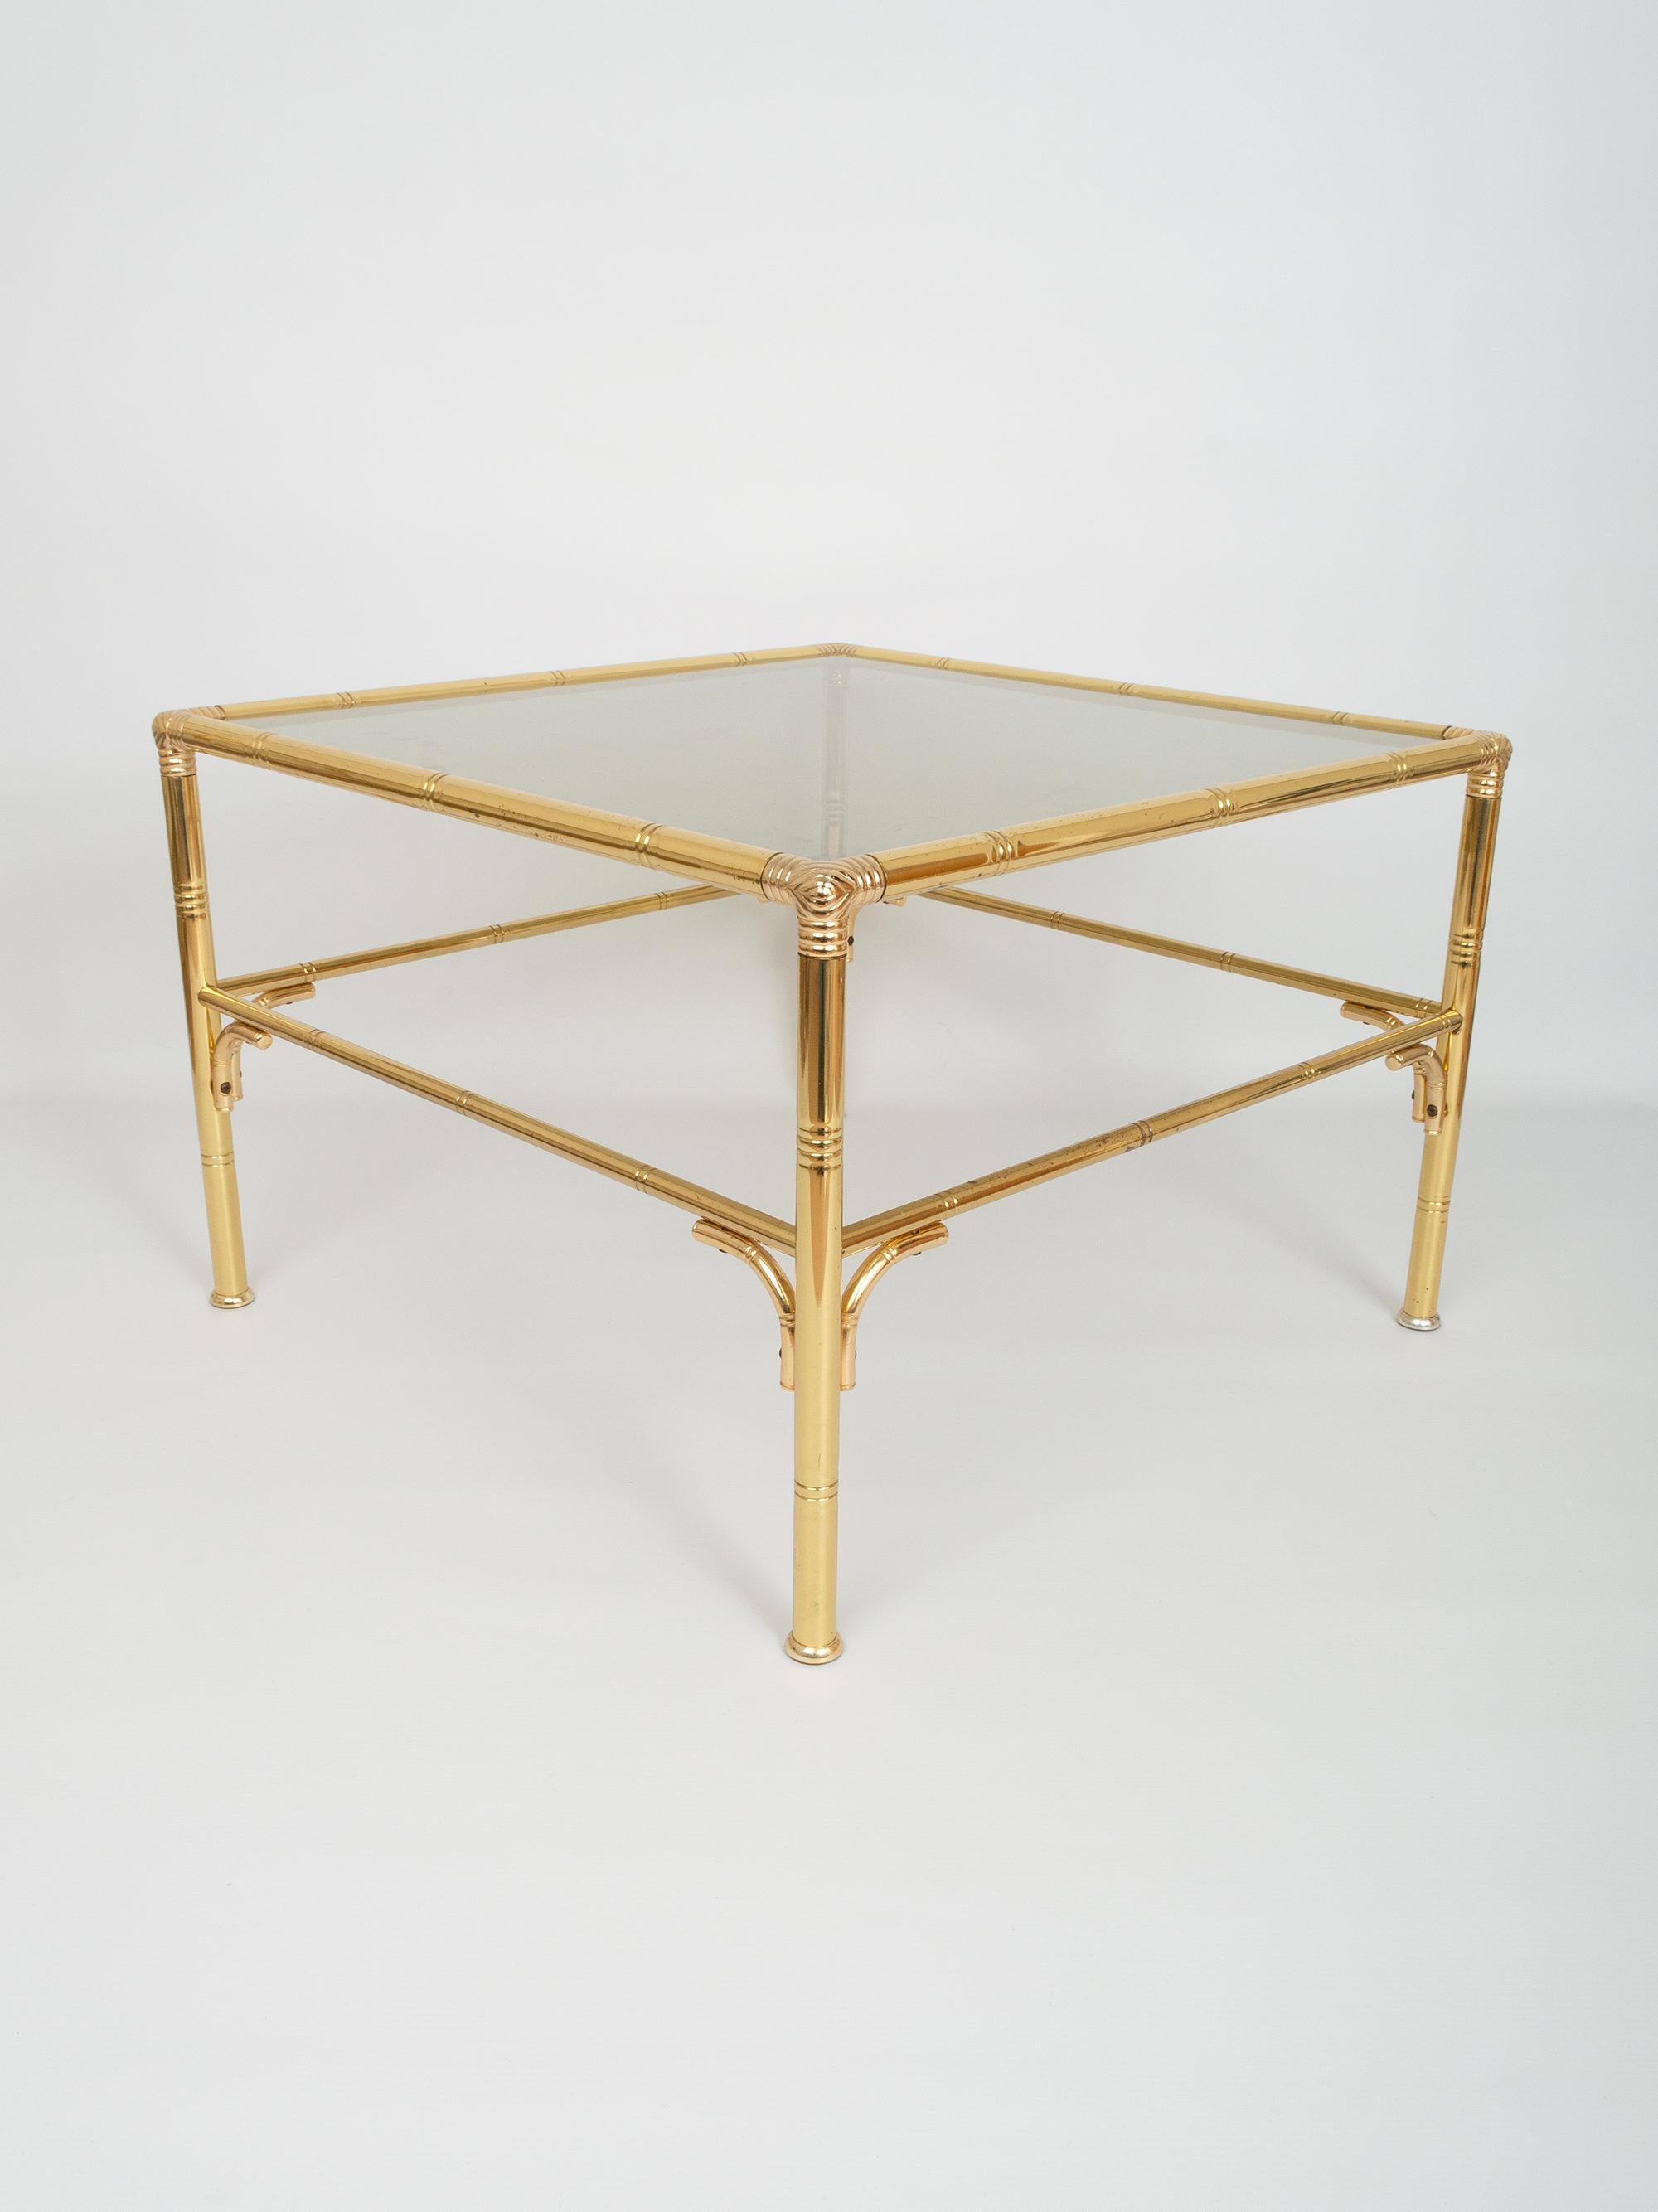 Italian Midcentury Faux Bamboo Gold Brass & Glass Square Coffee Table, Italy, circa 1970 For Sale